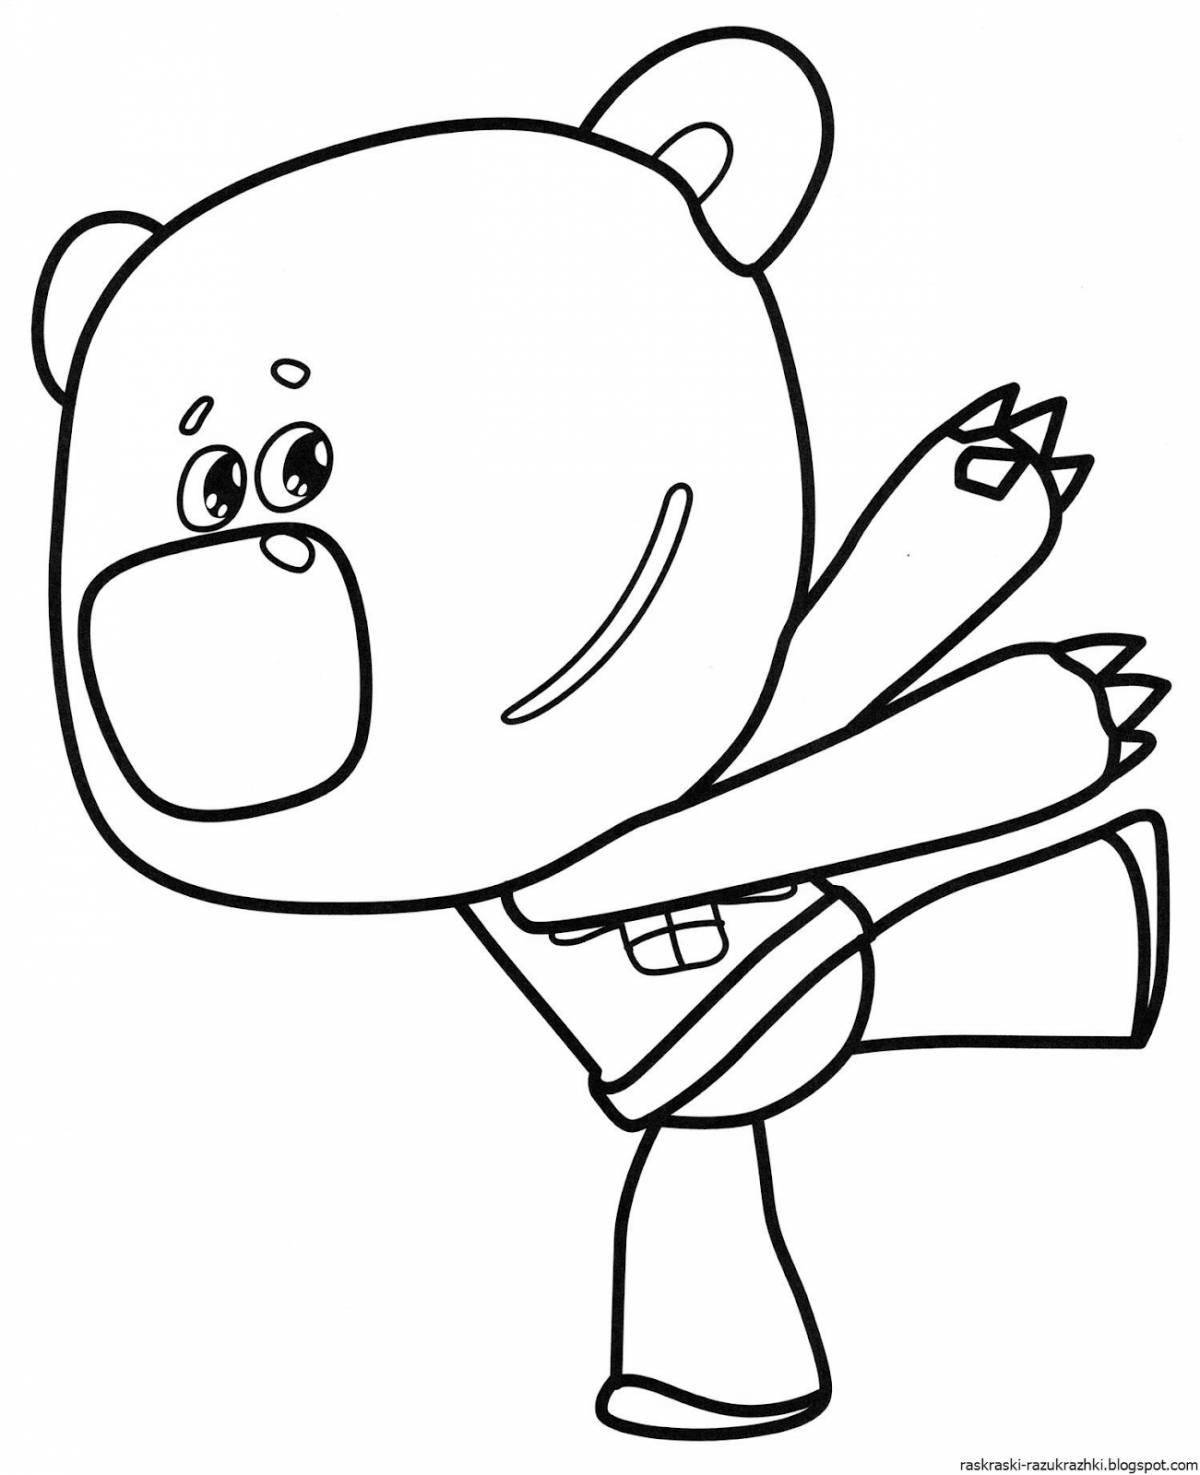 Curious bear coloring page